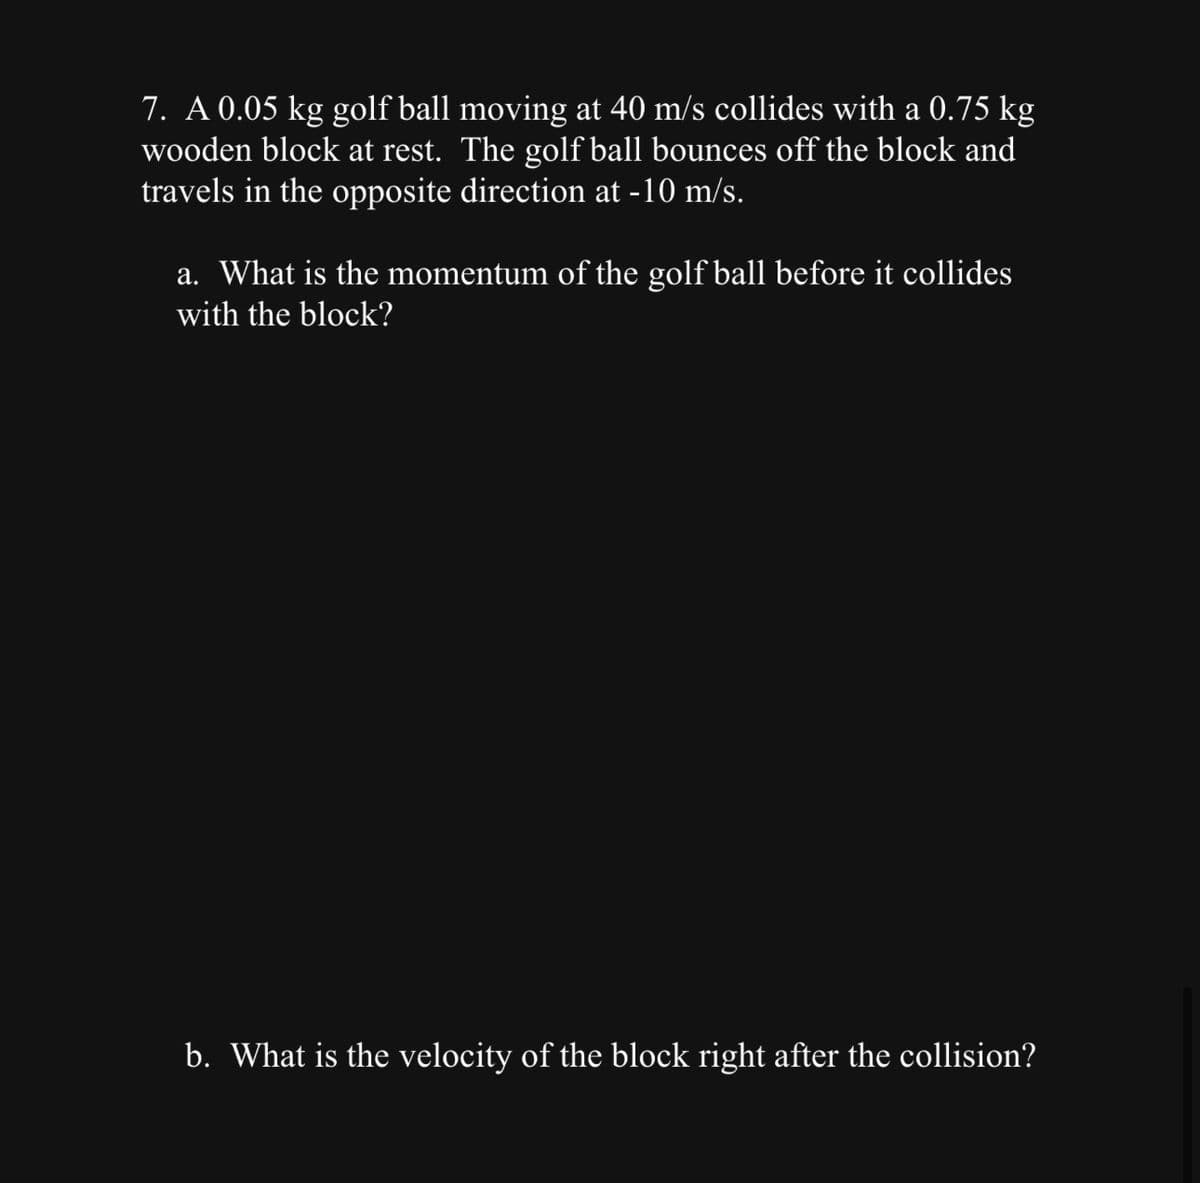 7. A 0.05 kg golf ball moving at 40 m/s collides with a 0.75 kg
wooden block at rest. The golf ball bounces off the block and
travels in the opposite direction at -10 m/s.
a. What is the momentum of the golf ball before it collides
with the block?
b. What is the velocity of the block right after the collision?